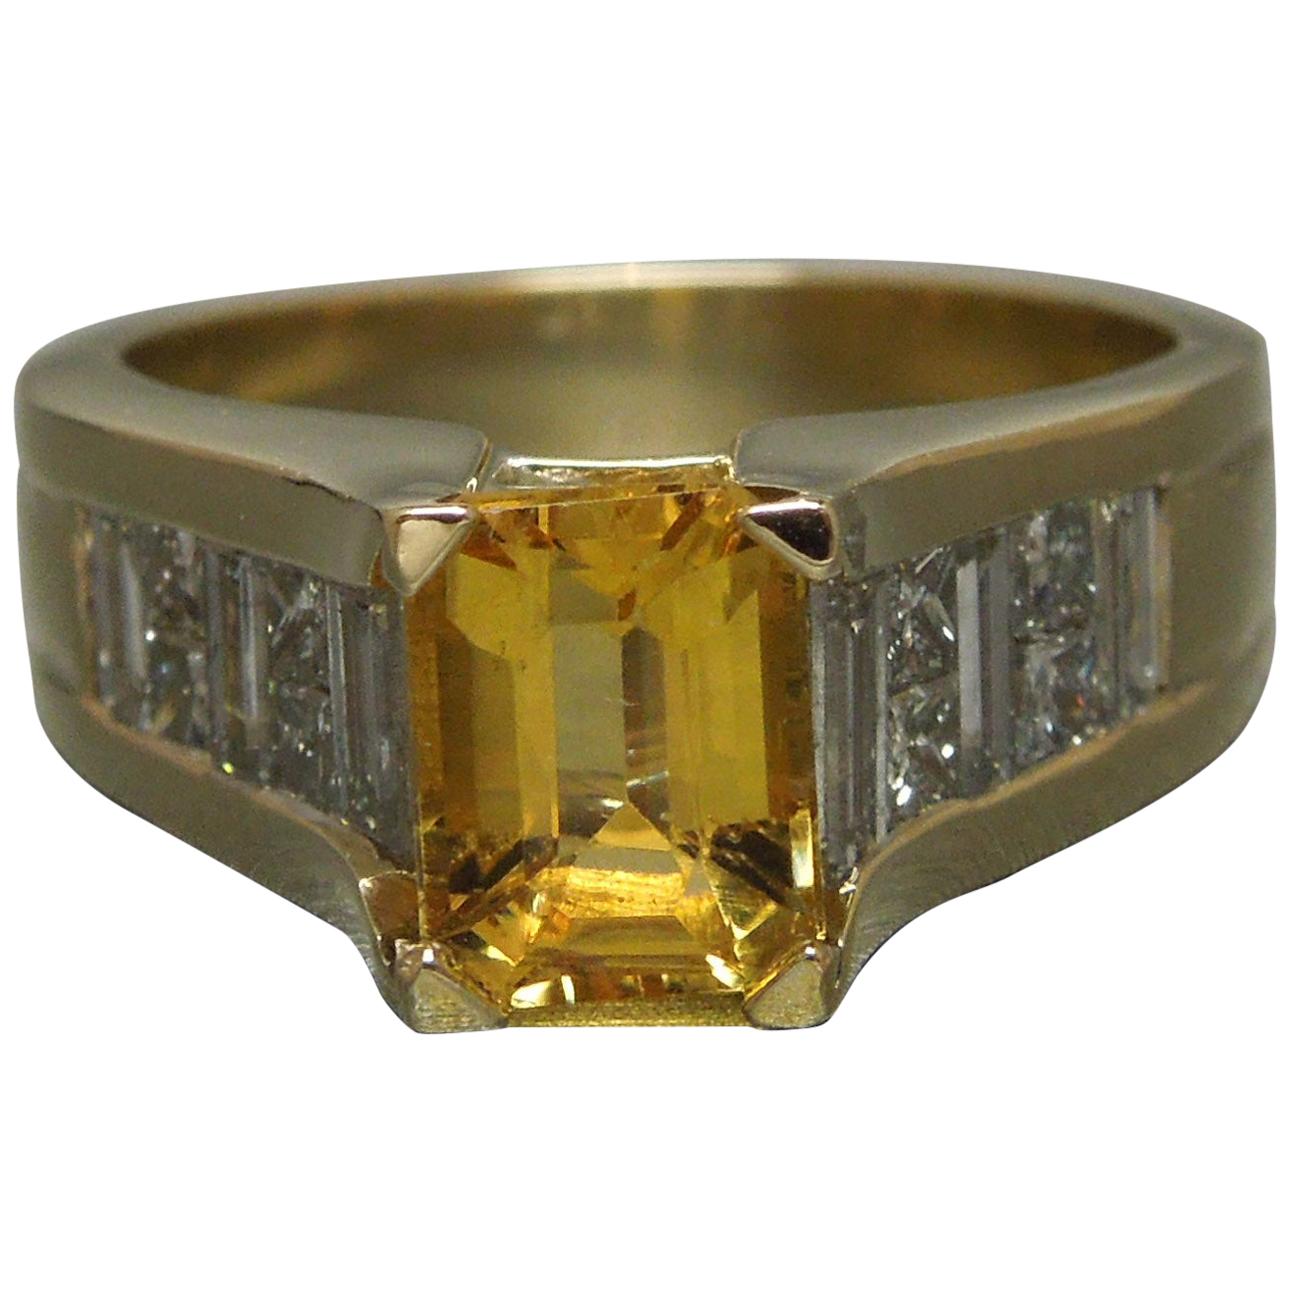 Emerald Cut Golden Beryl Solitaire and Baguette Diamond Pyramid Ring